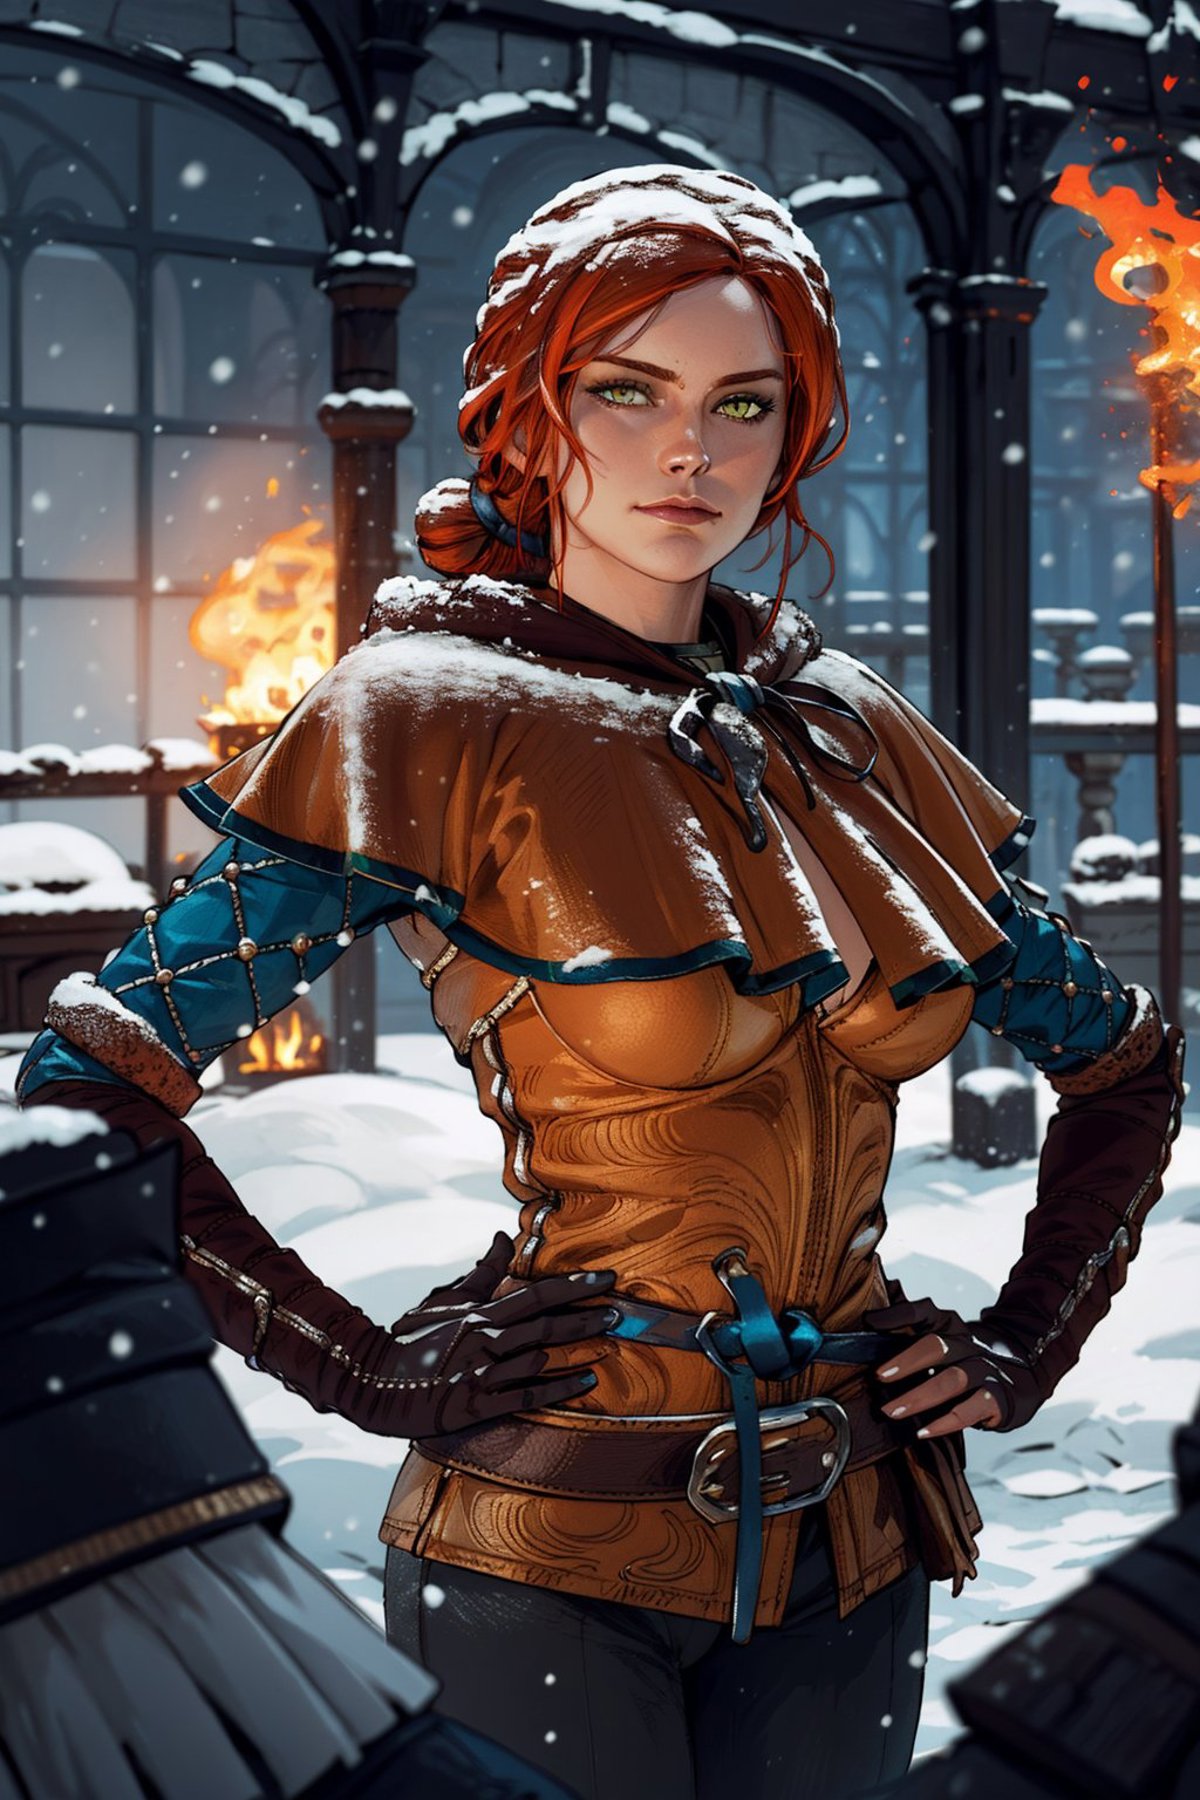 Triss Merigold | The Witcher 3 : Wild Hunt image by soul3142